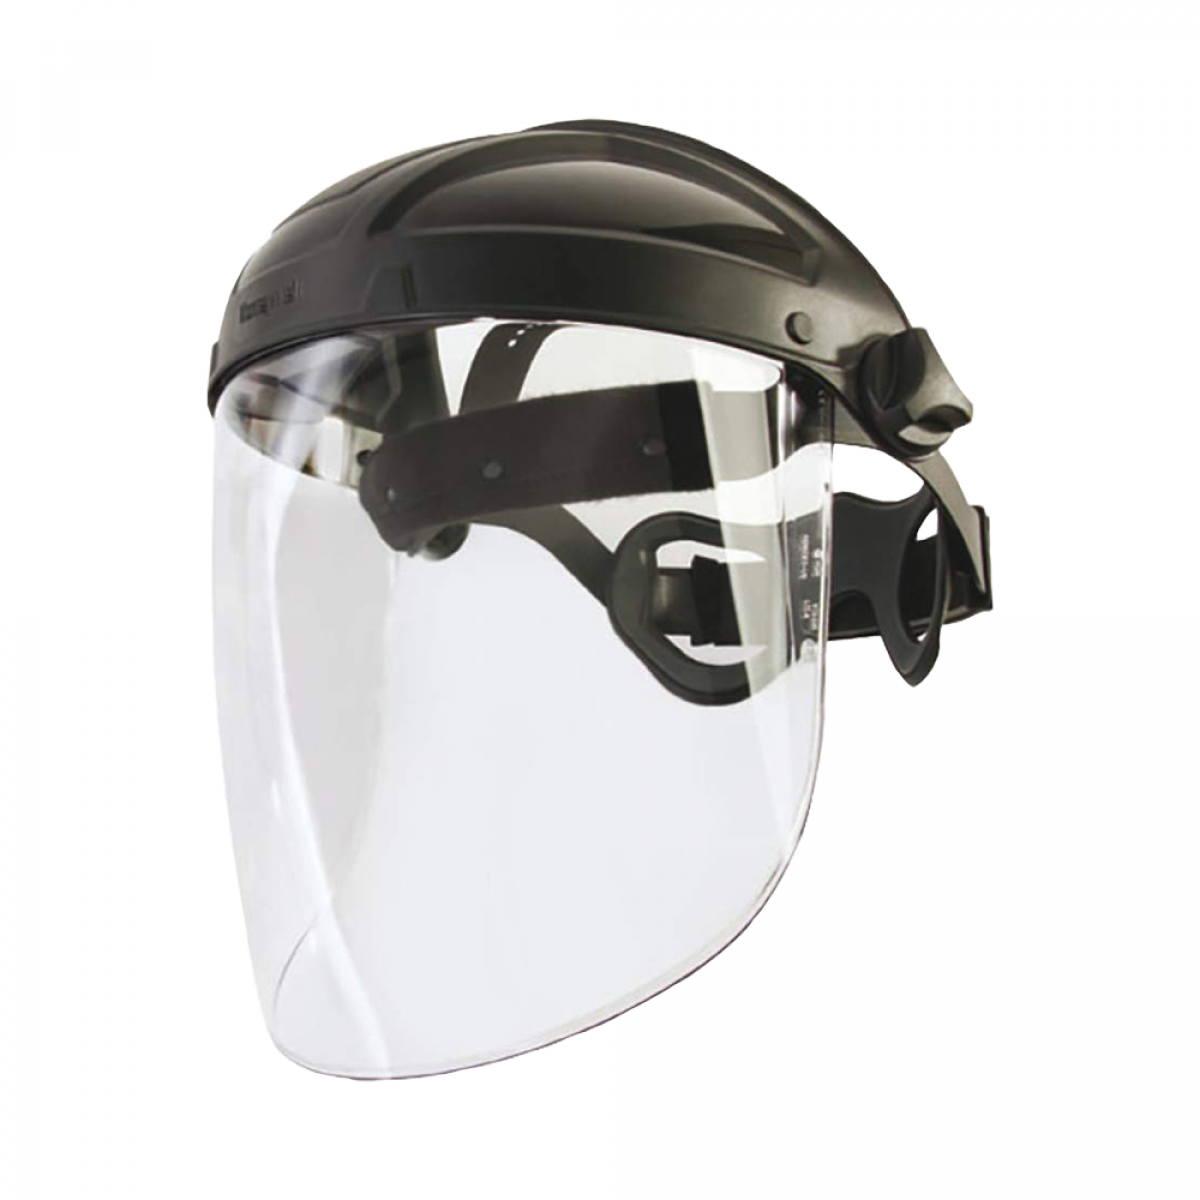 Honeywell Turbo Shield - PPE face & head protectionTurbo-Shield-PPE-Face-Protection-Face-Head-Shield.png